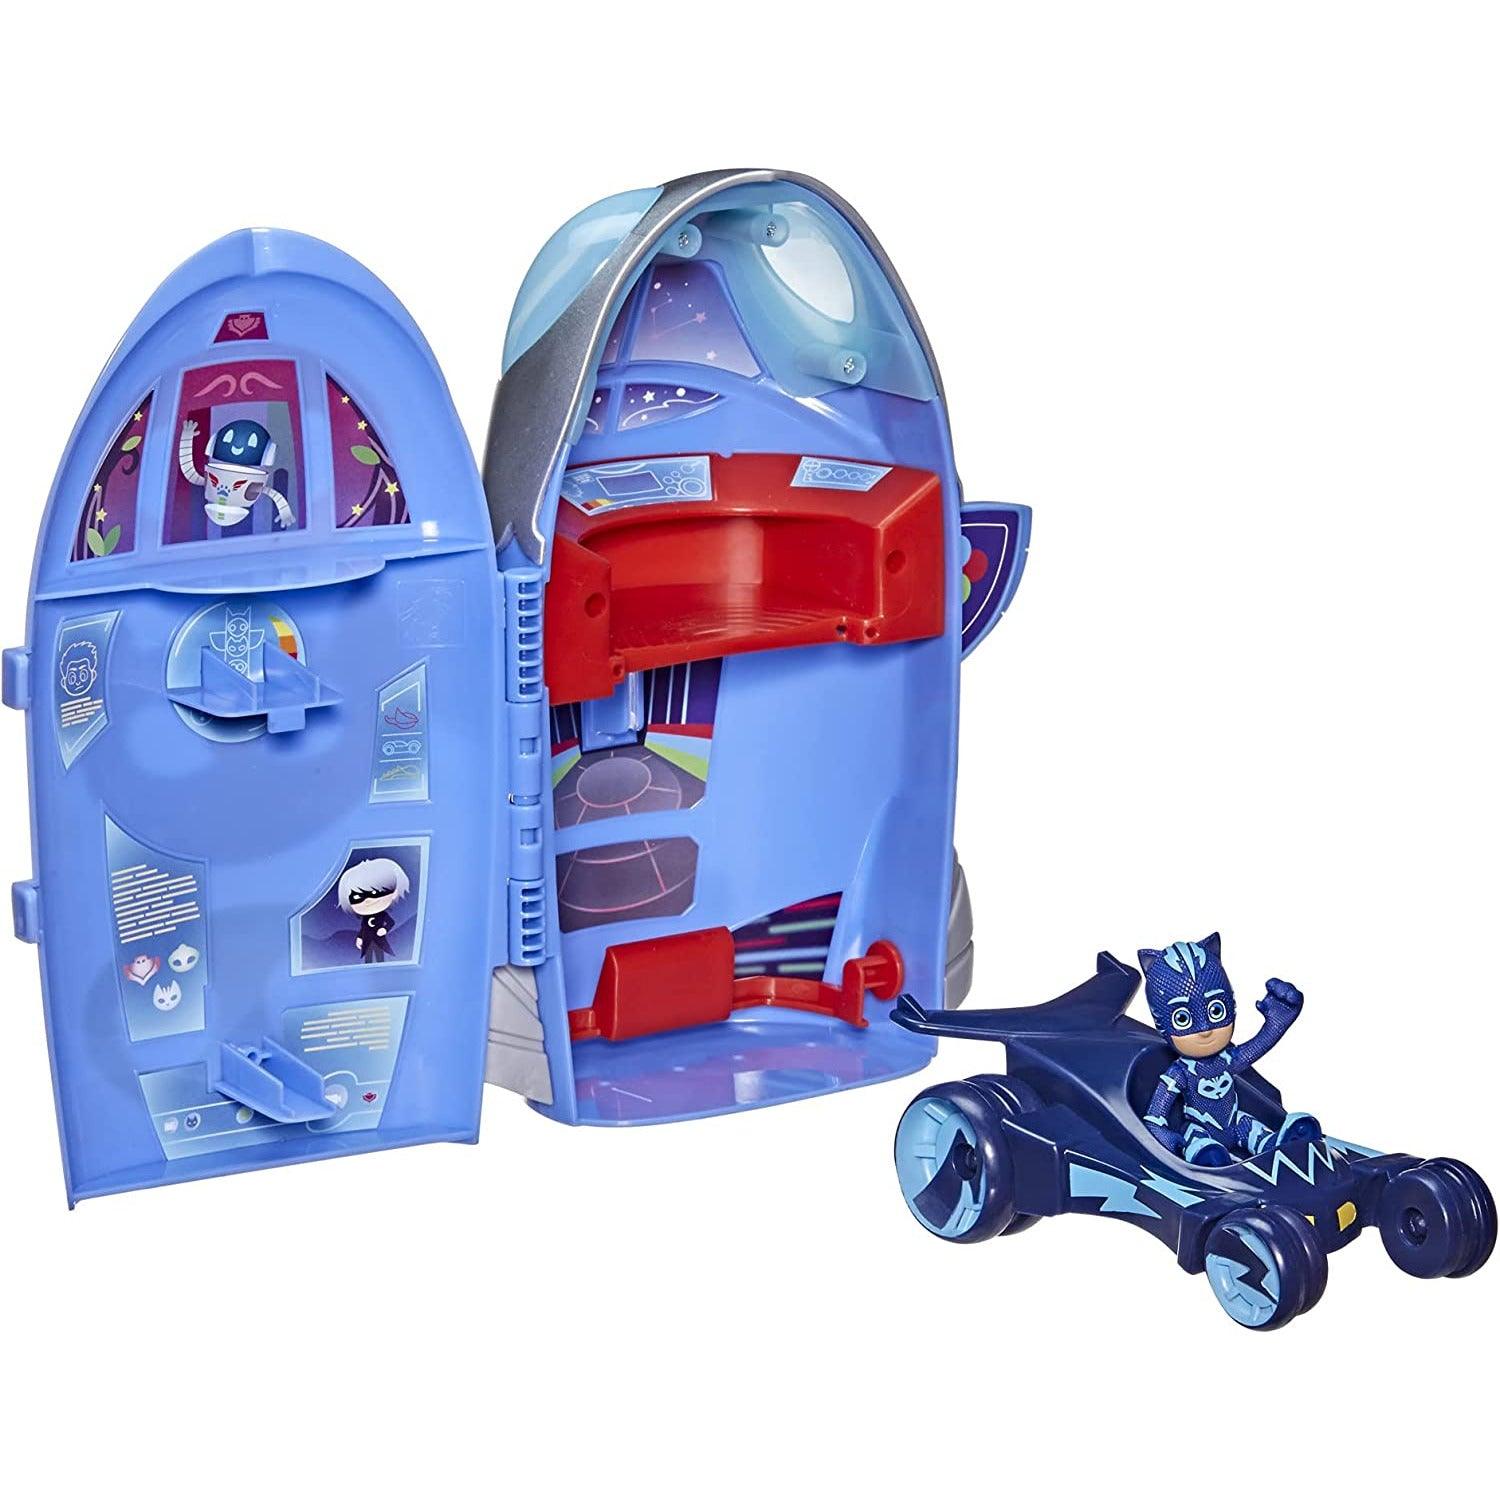 Hasbro PJ Masks 2-in-1 HQ Playset, Headquarters and Rocket Preschool Toy for Kids - BumbleToys - 5-7 Years, Action Figures, Avengers, Boys, Eagle Plus